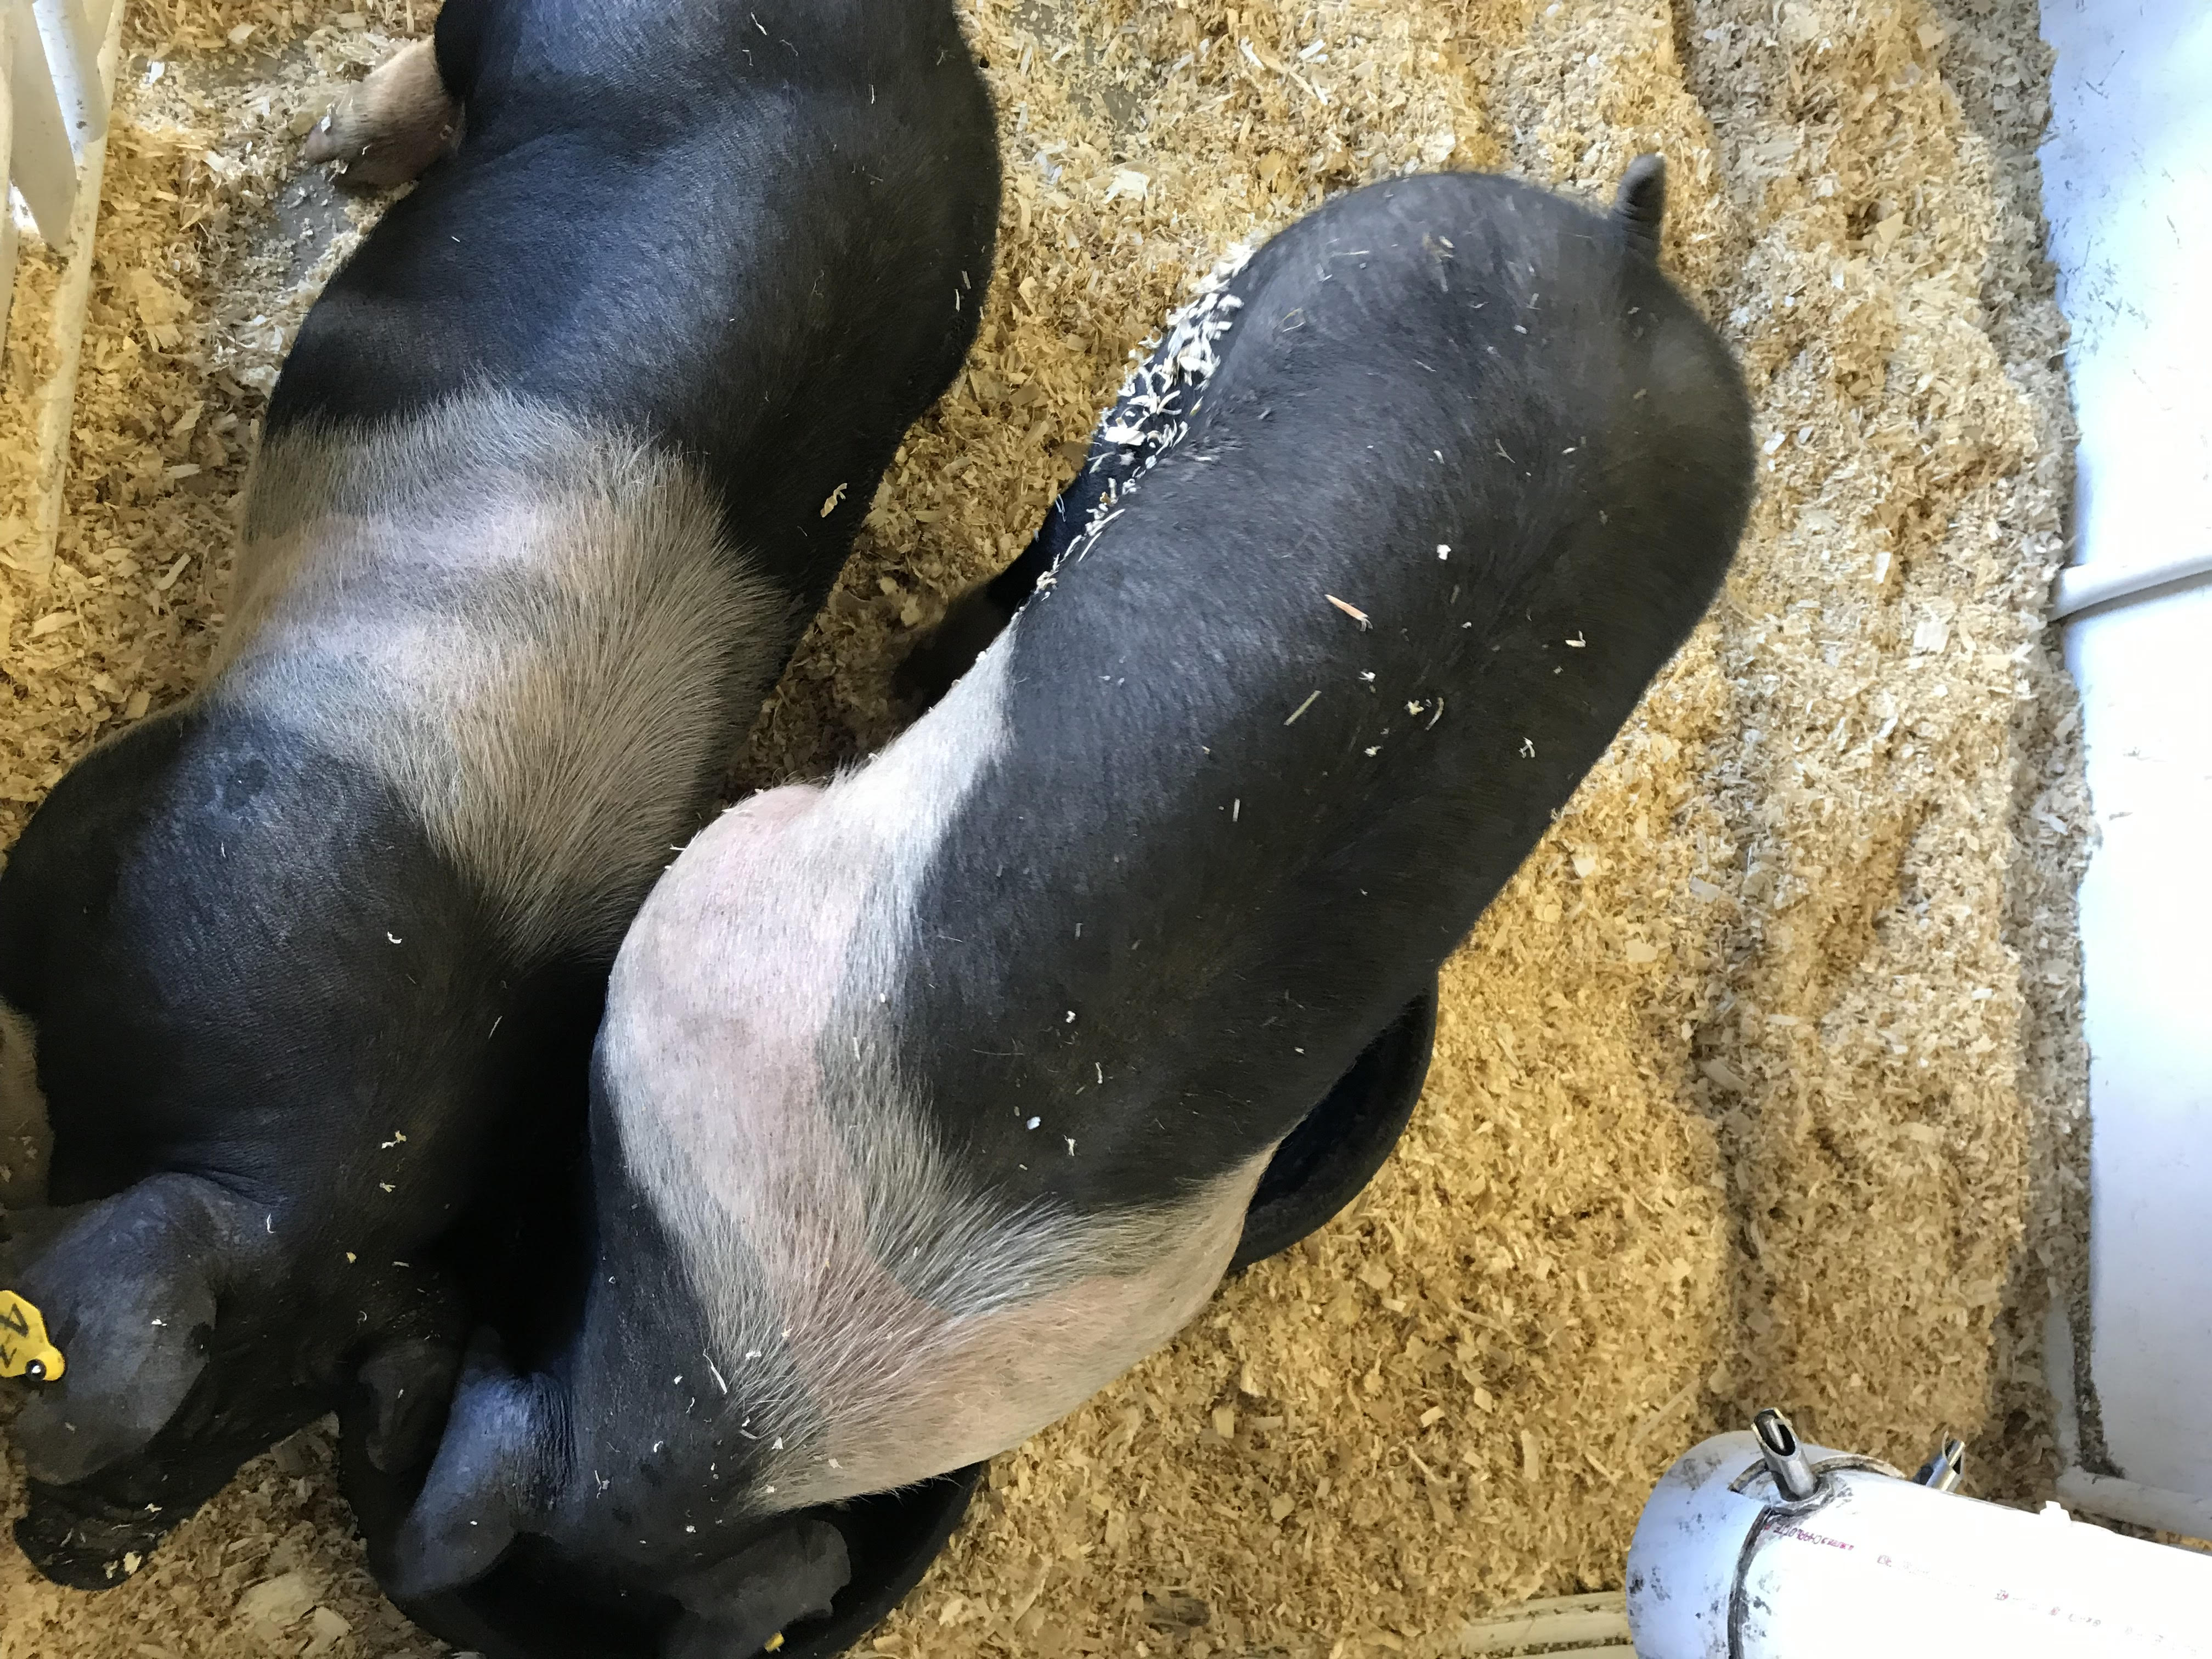 Afternoon Ag News, December 28, 2021: Market hog numbers up in North Dakota from 2020